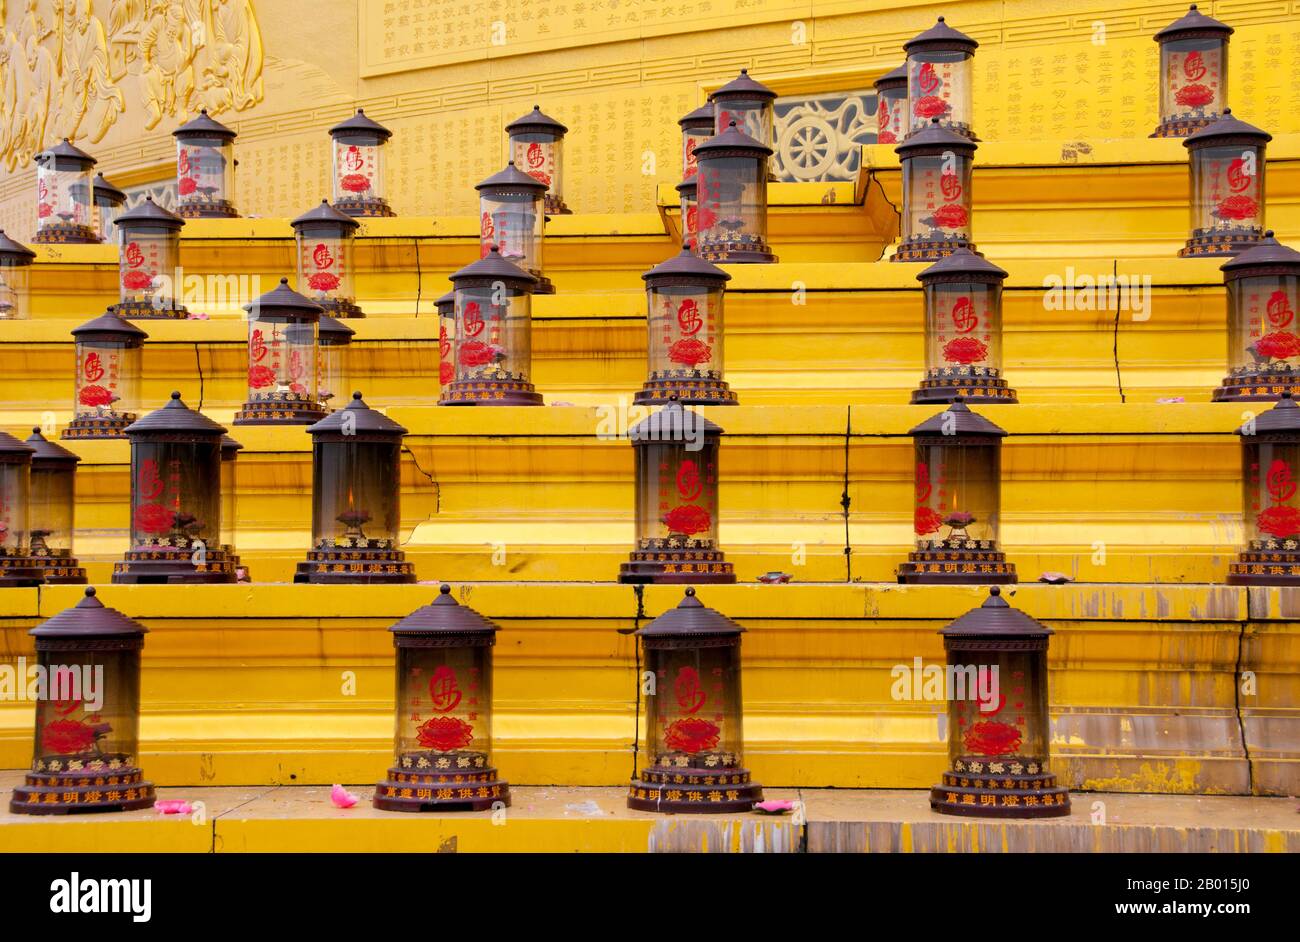 China: Lanterns at the Puxian statue, Golden Summit, Emeishan (Mount Emei), Sichuan Province.  At 3,099 metres (10,167 ft), Mt. Emei is the highest of the Four Sacred Buddhist Mountains of China. The patron bodhisattva of Emei is Samantabhadra, known in Chinese as Puxian. 16th and 17th century sources allude to the practice of martial arts in the monasteries of Mount Emei. Stock Photo